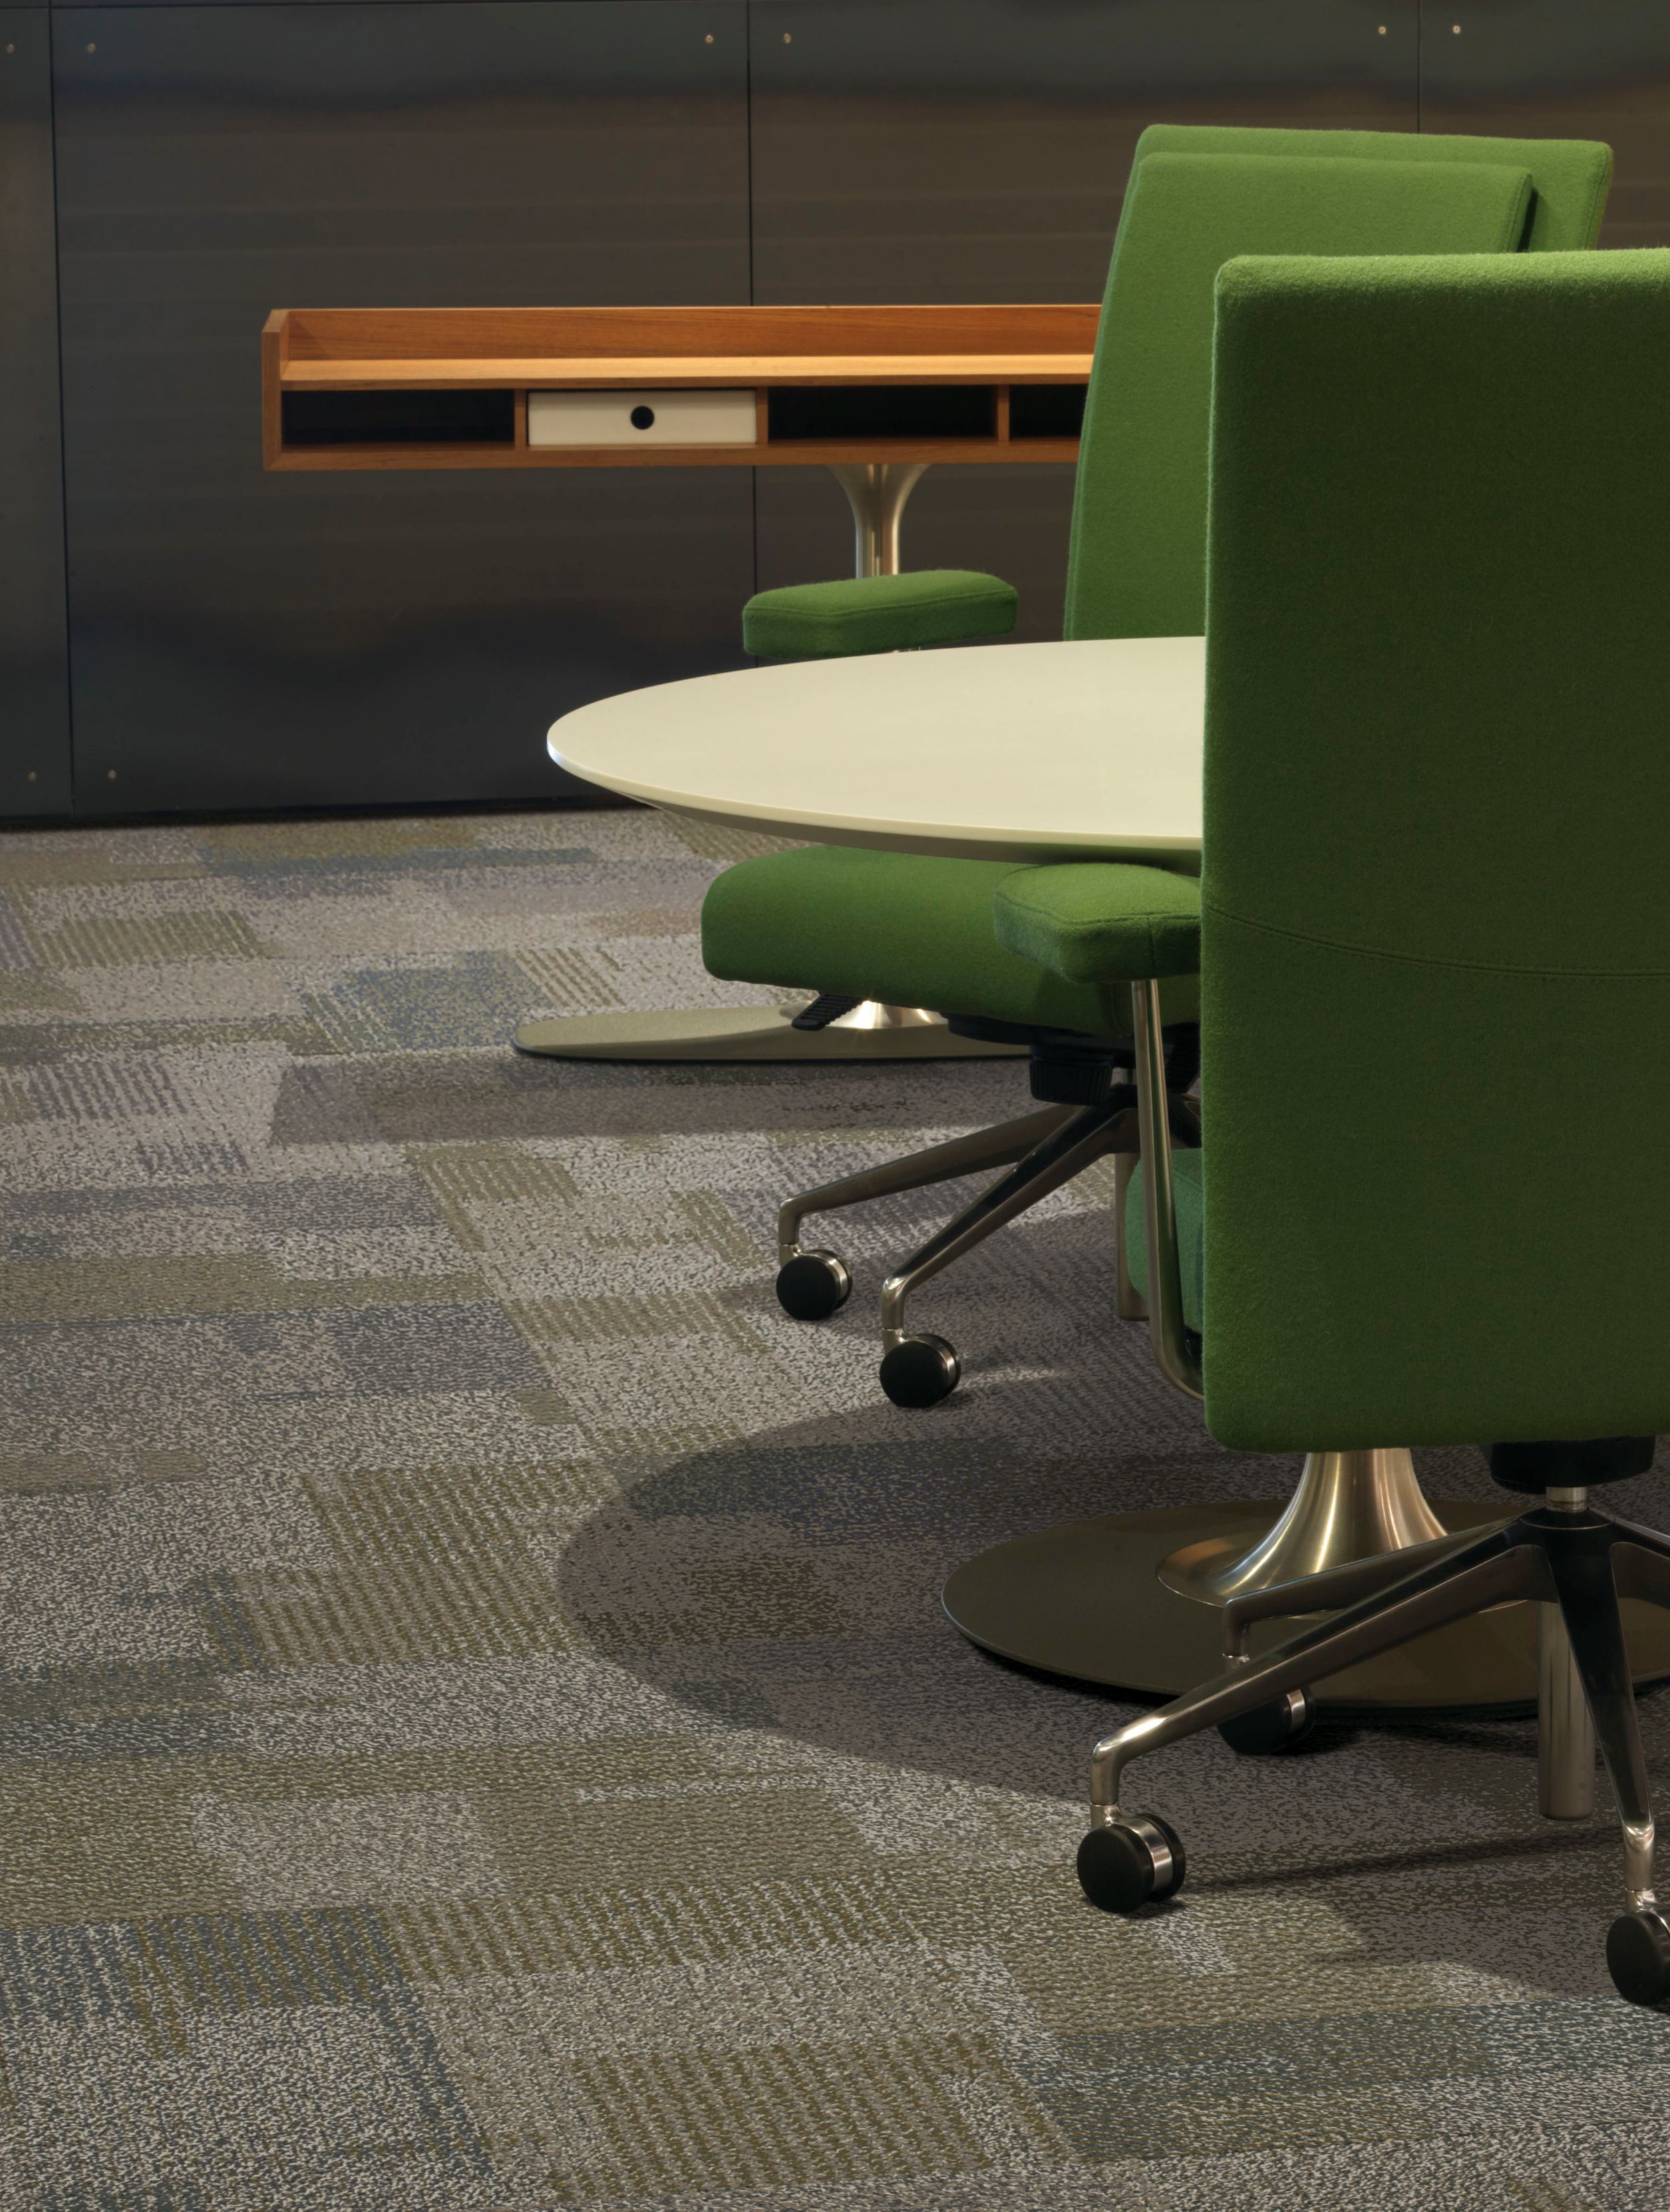 Interface Entropy carpet tile in room with green chairs and wooden shelf in background numéro d’image 4